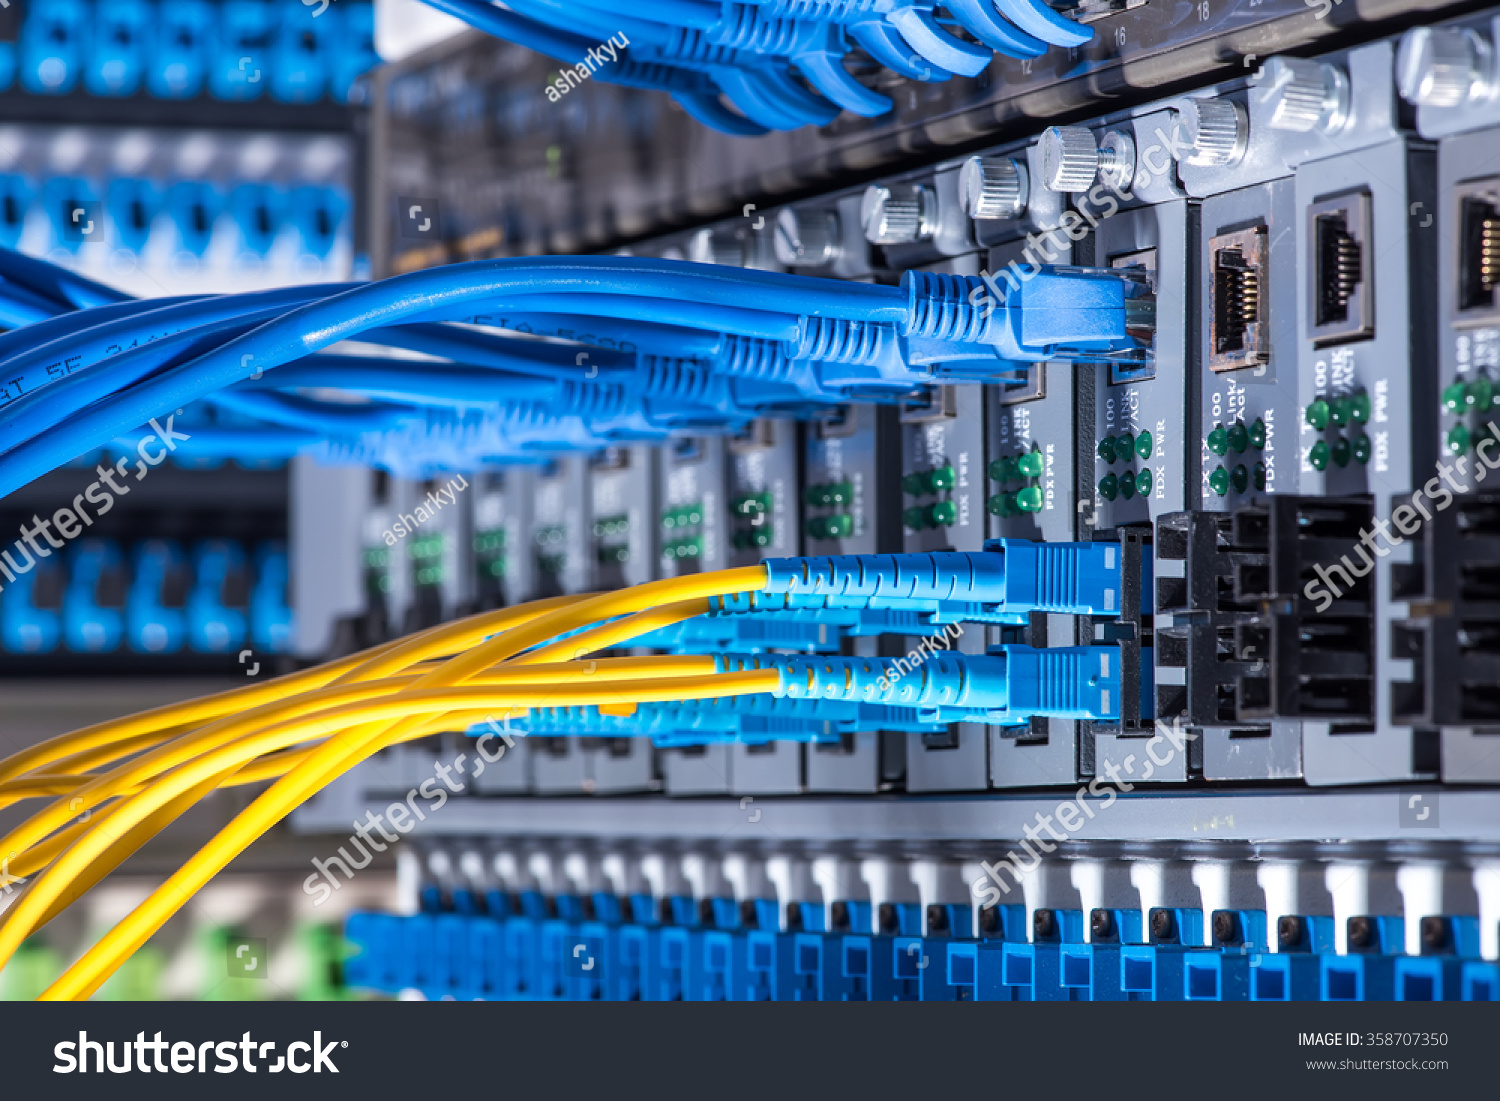 Fiber optic connecting on core network swtich #358707350